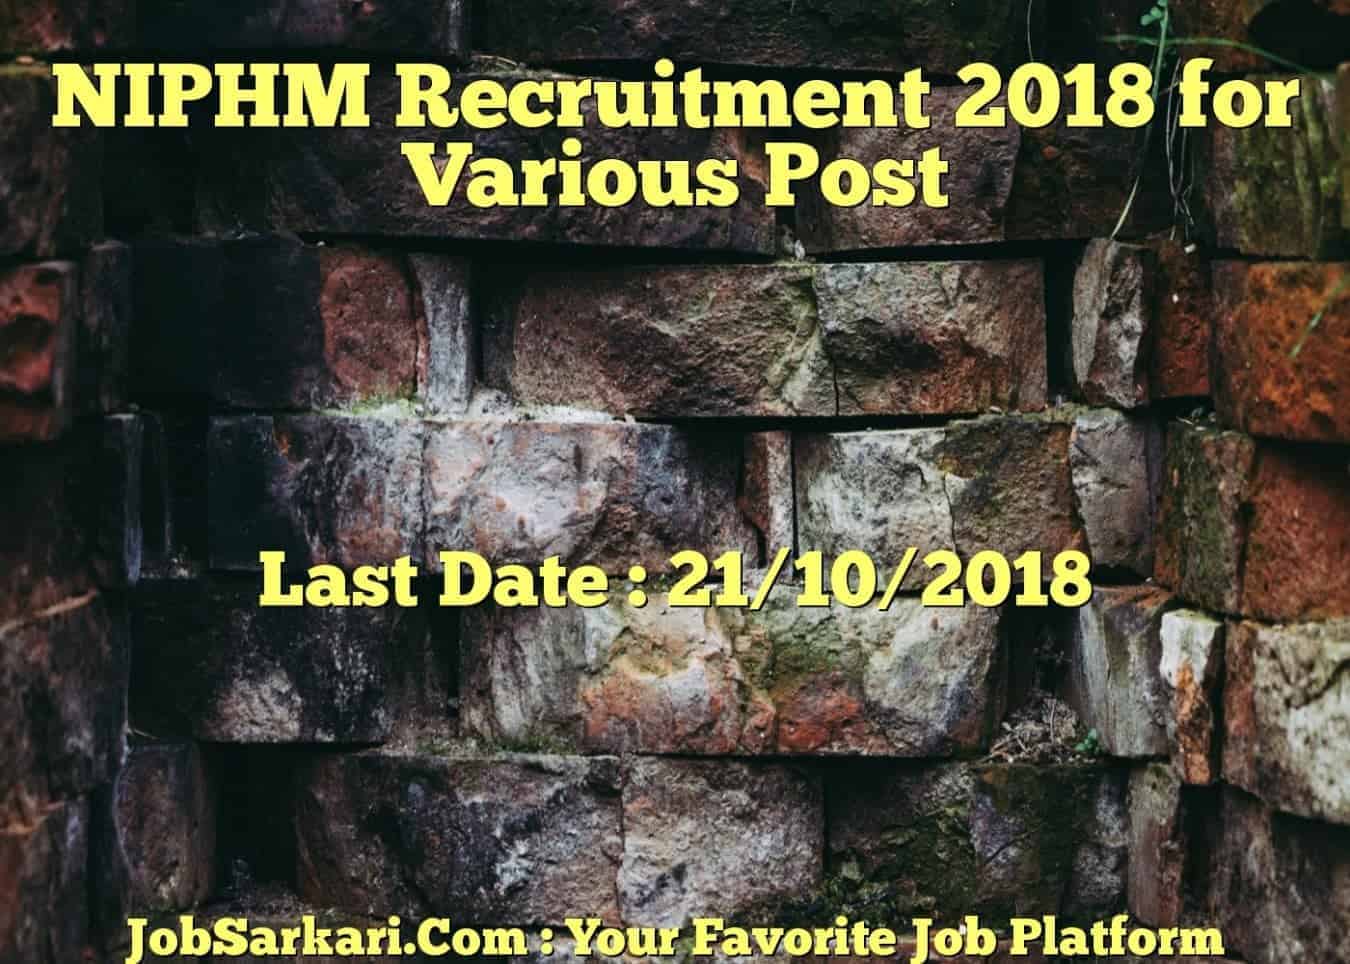 NIPHM Recruitment 2018 for Various Post